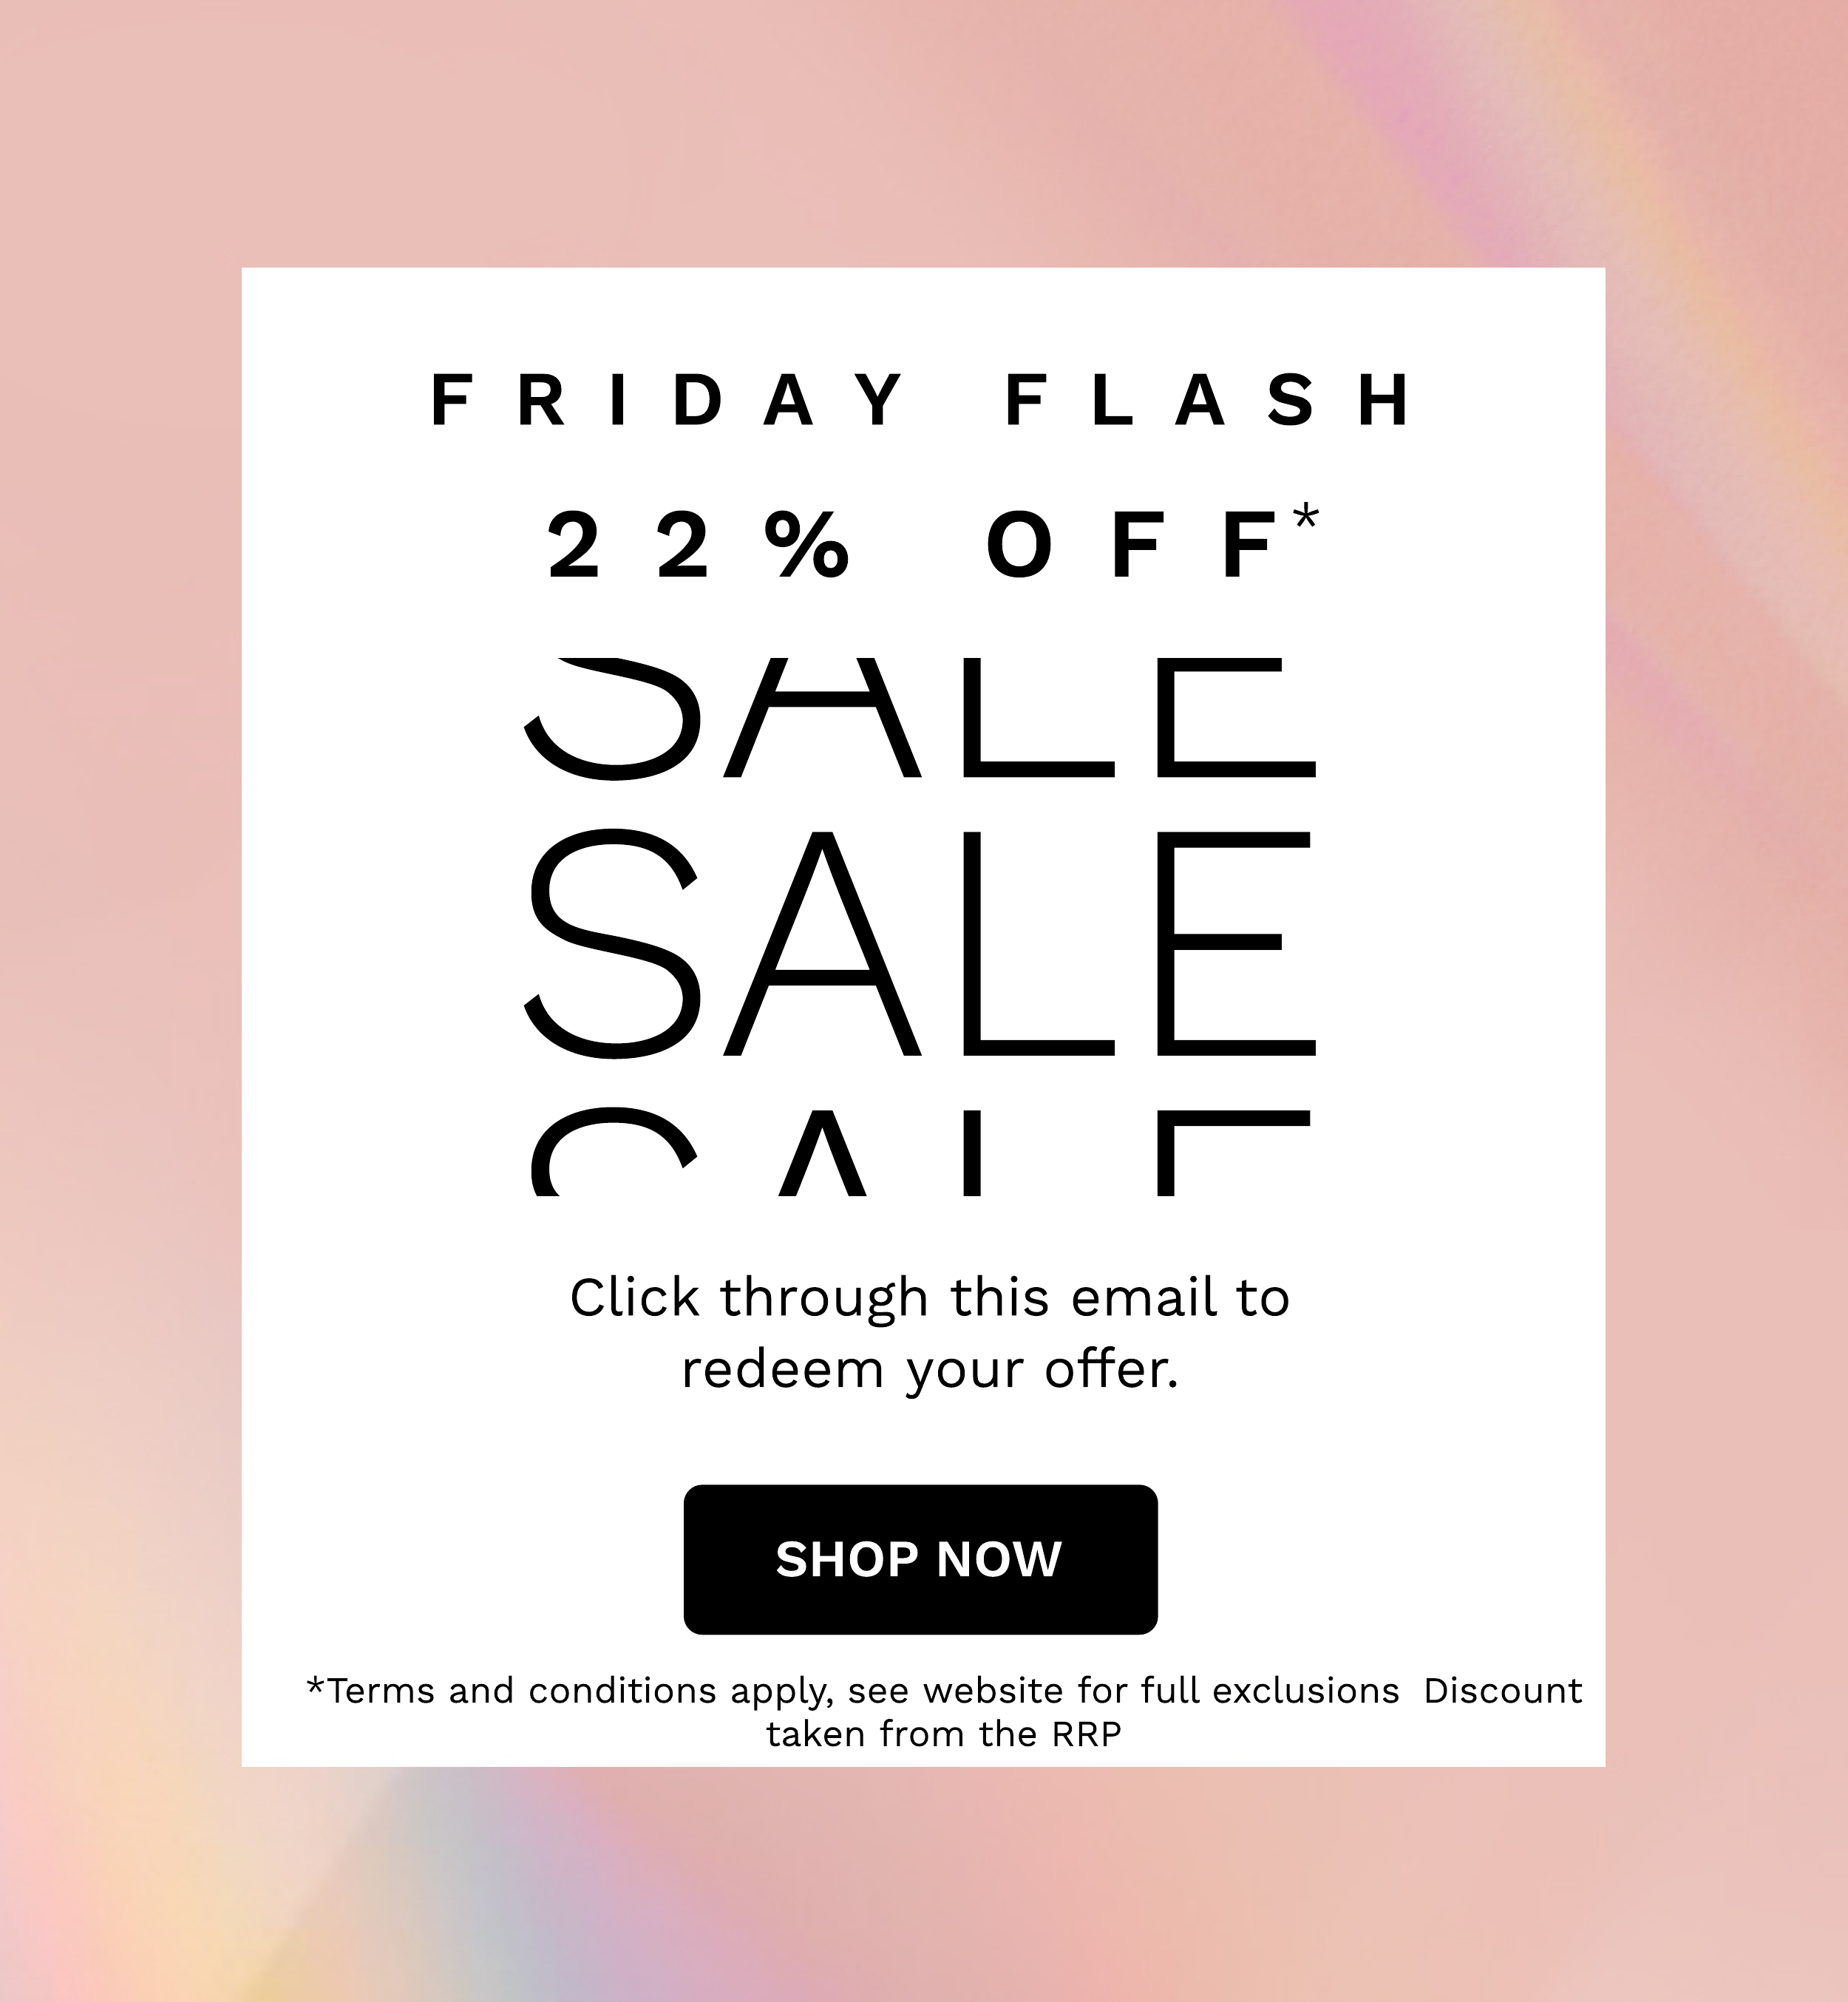 FRIDAY FLASH SALE 22 OFF 5 HOURS ONLY